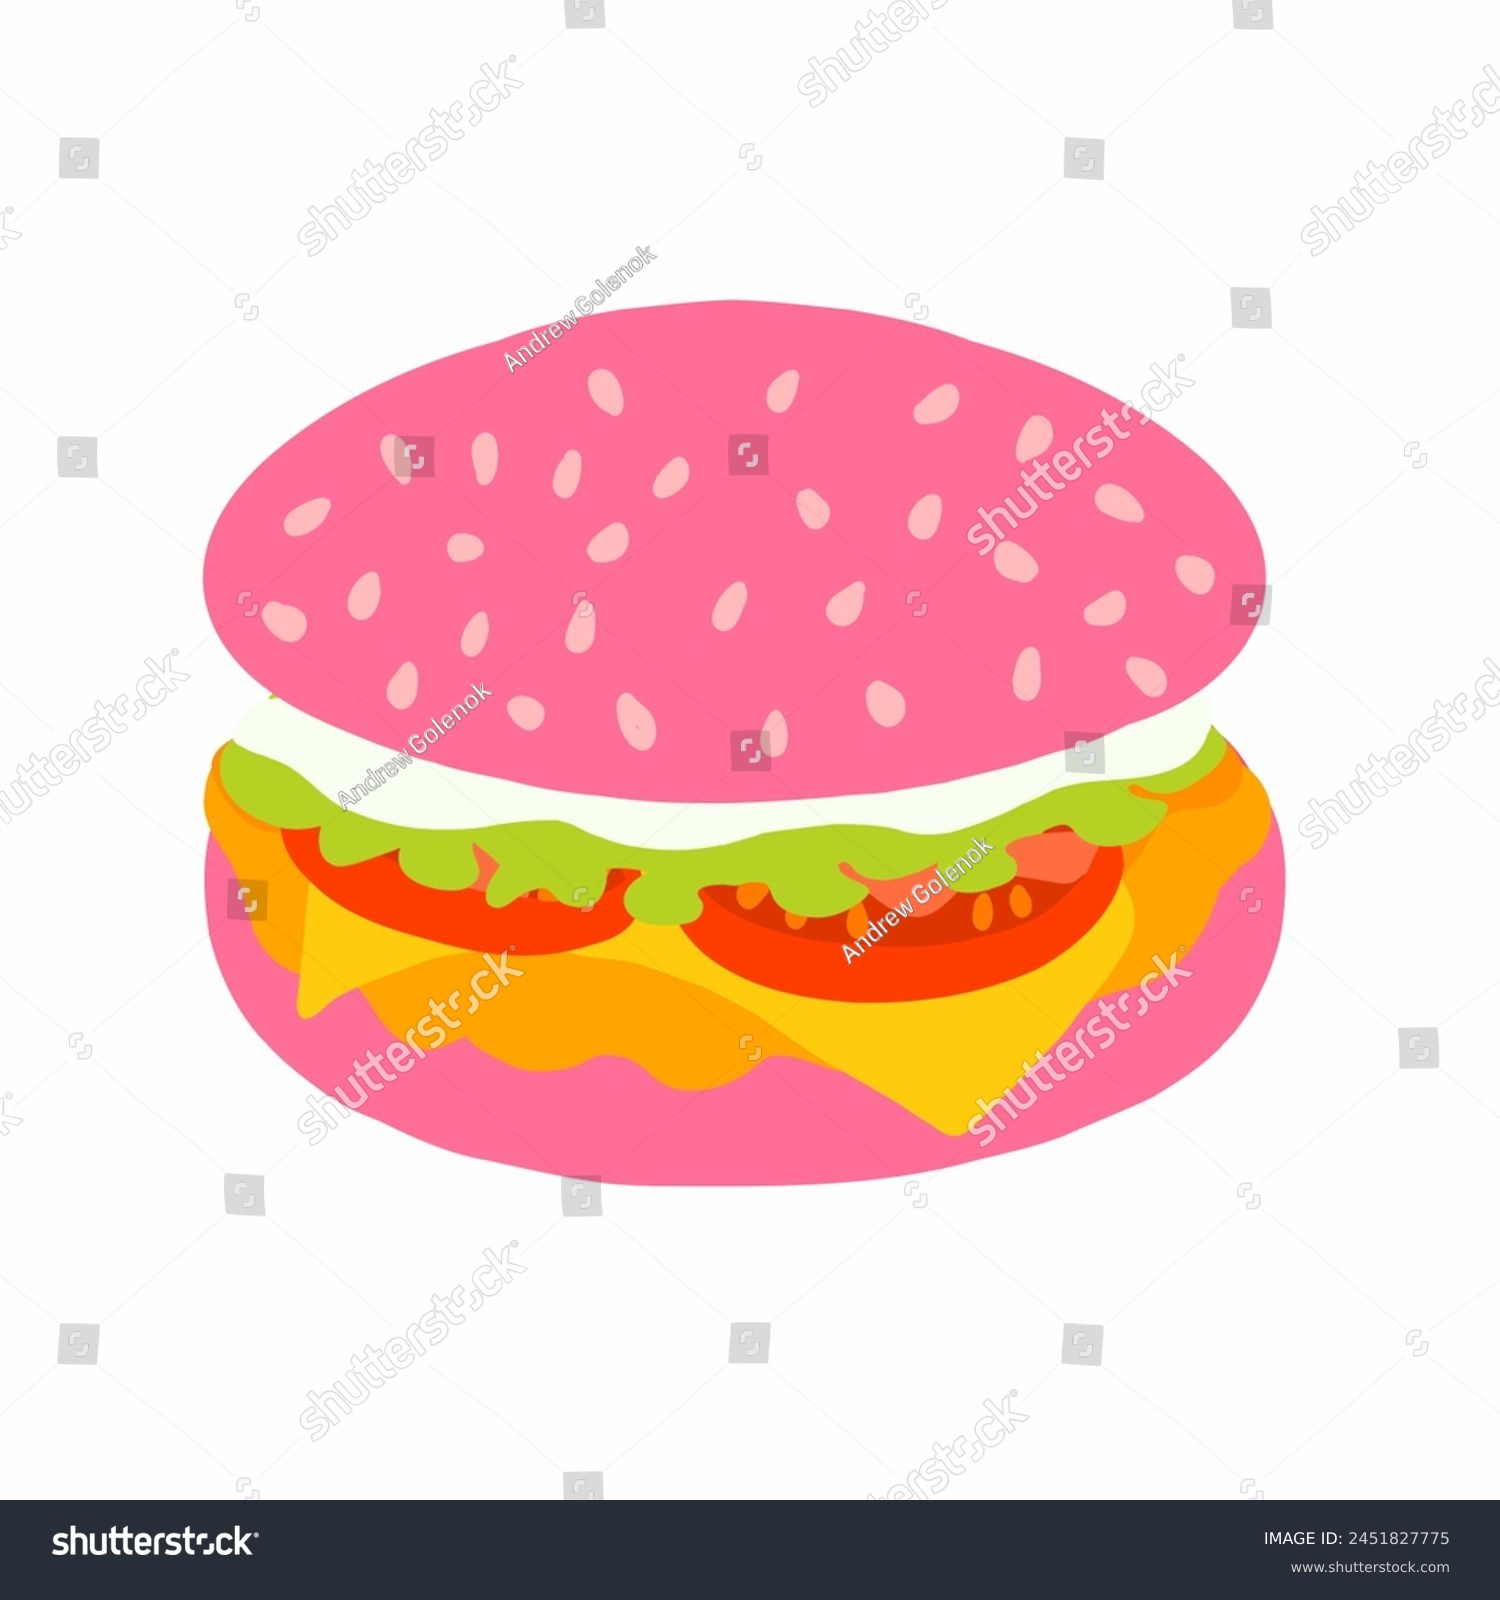 SVG of Pink burger with chicken cutlet, fresh tomato, salad leaf, cheese and mayo sauce icon in cartoon flat style. Vector illustration isolated on white background. For menu, poster, infographic, restaurant svg